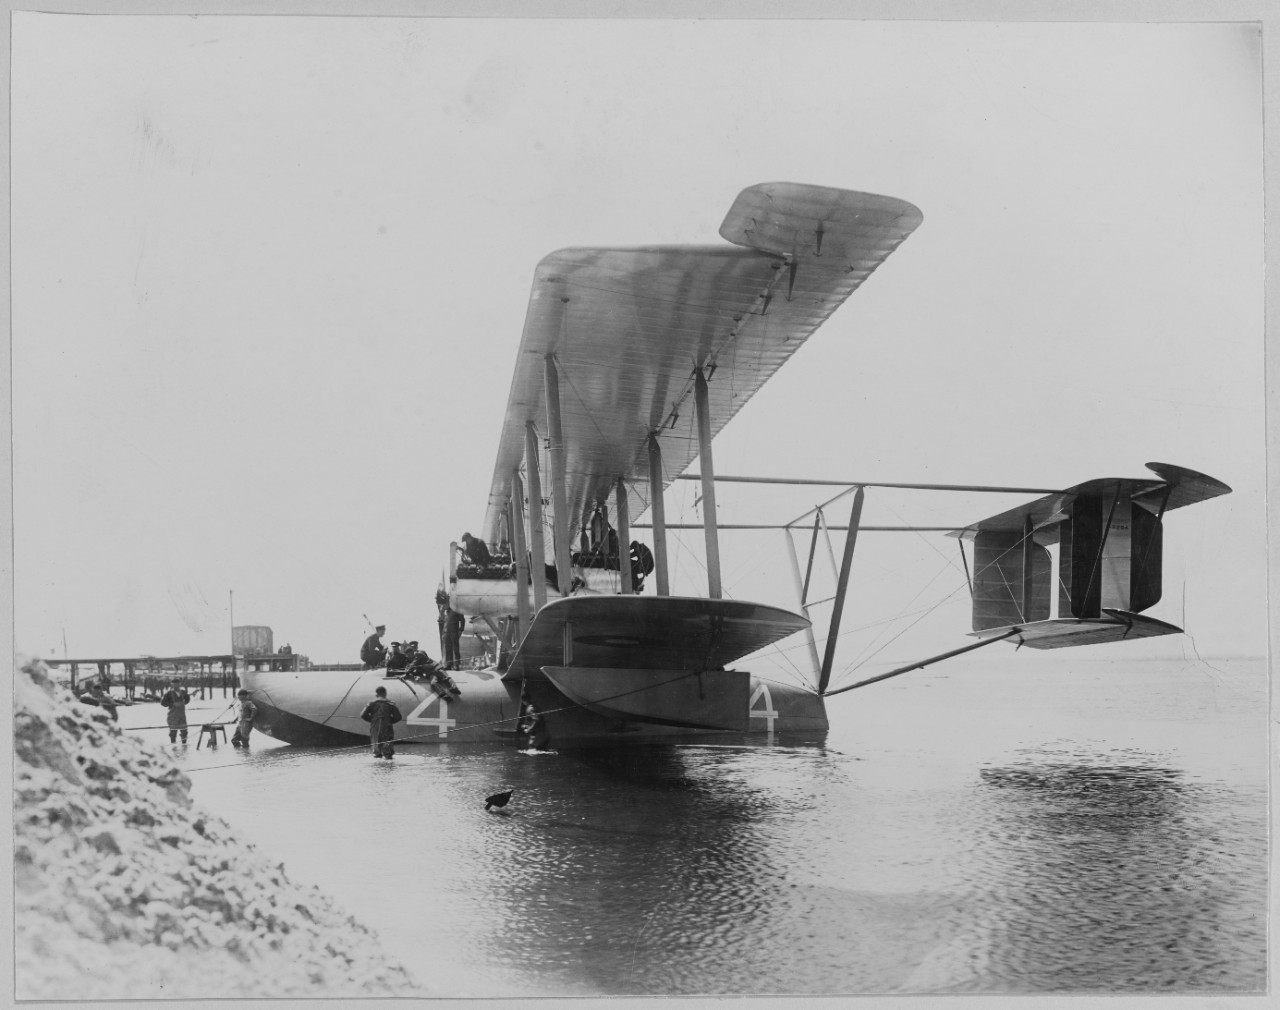 Photograph of the plane from the side